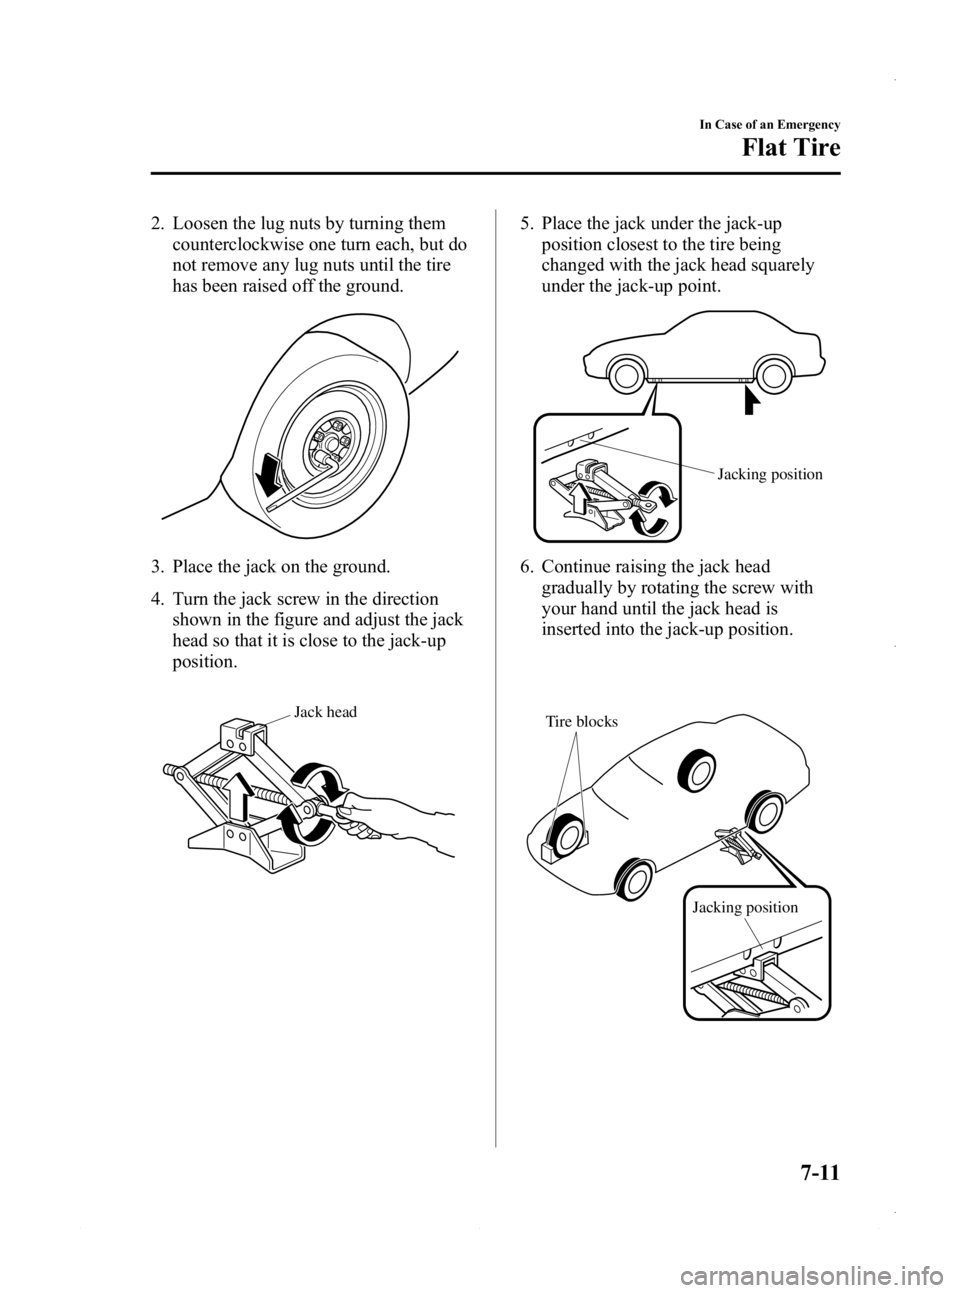 MAZDA MODEL 3 4-DOOR 2013  Owners Manual Black plate (447,1)
2. Loosen the lug nuts by turning themcounterclockwise one turn each, but do
not remove any lug nuts until the tire
has been raised off the ground.
3. Place the jack on the ground.